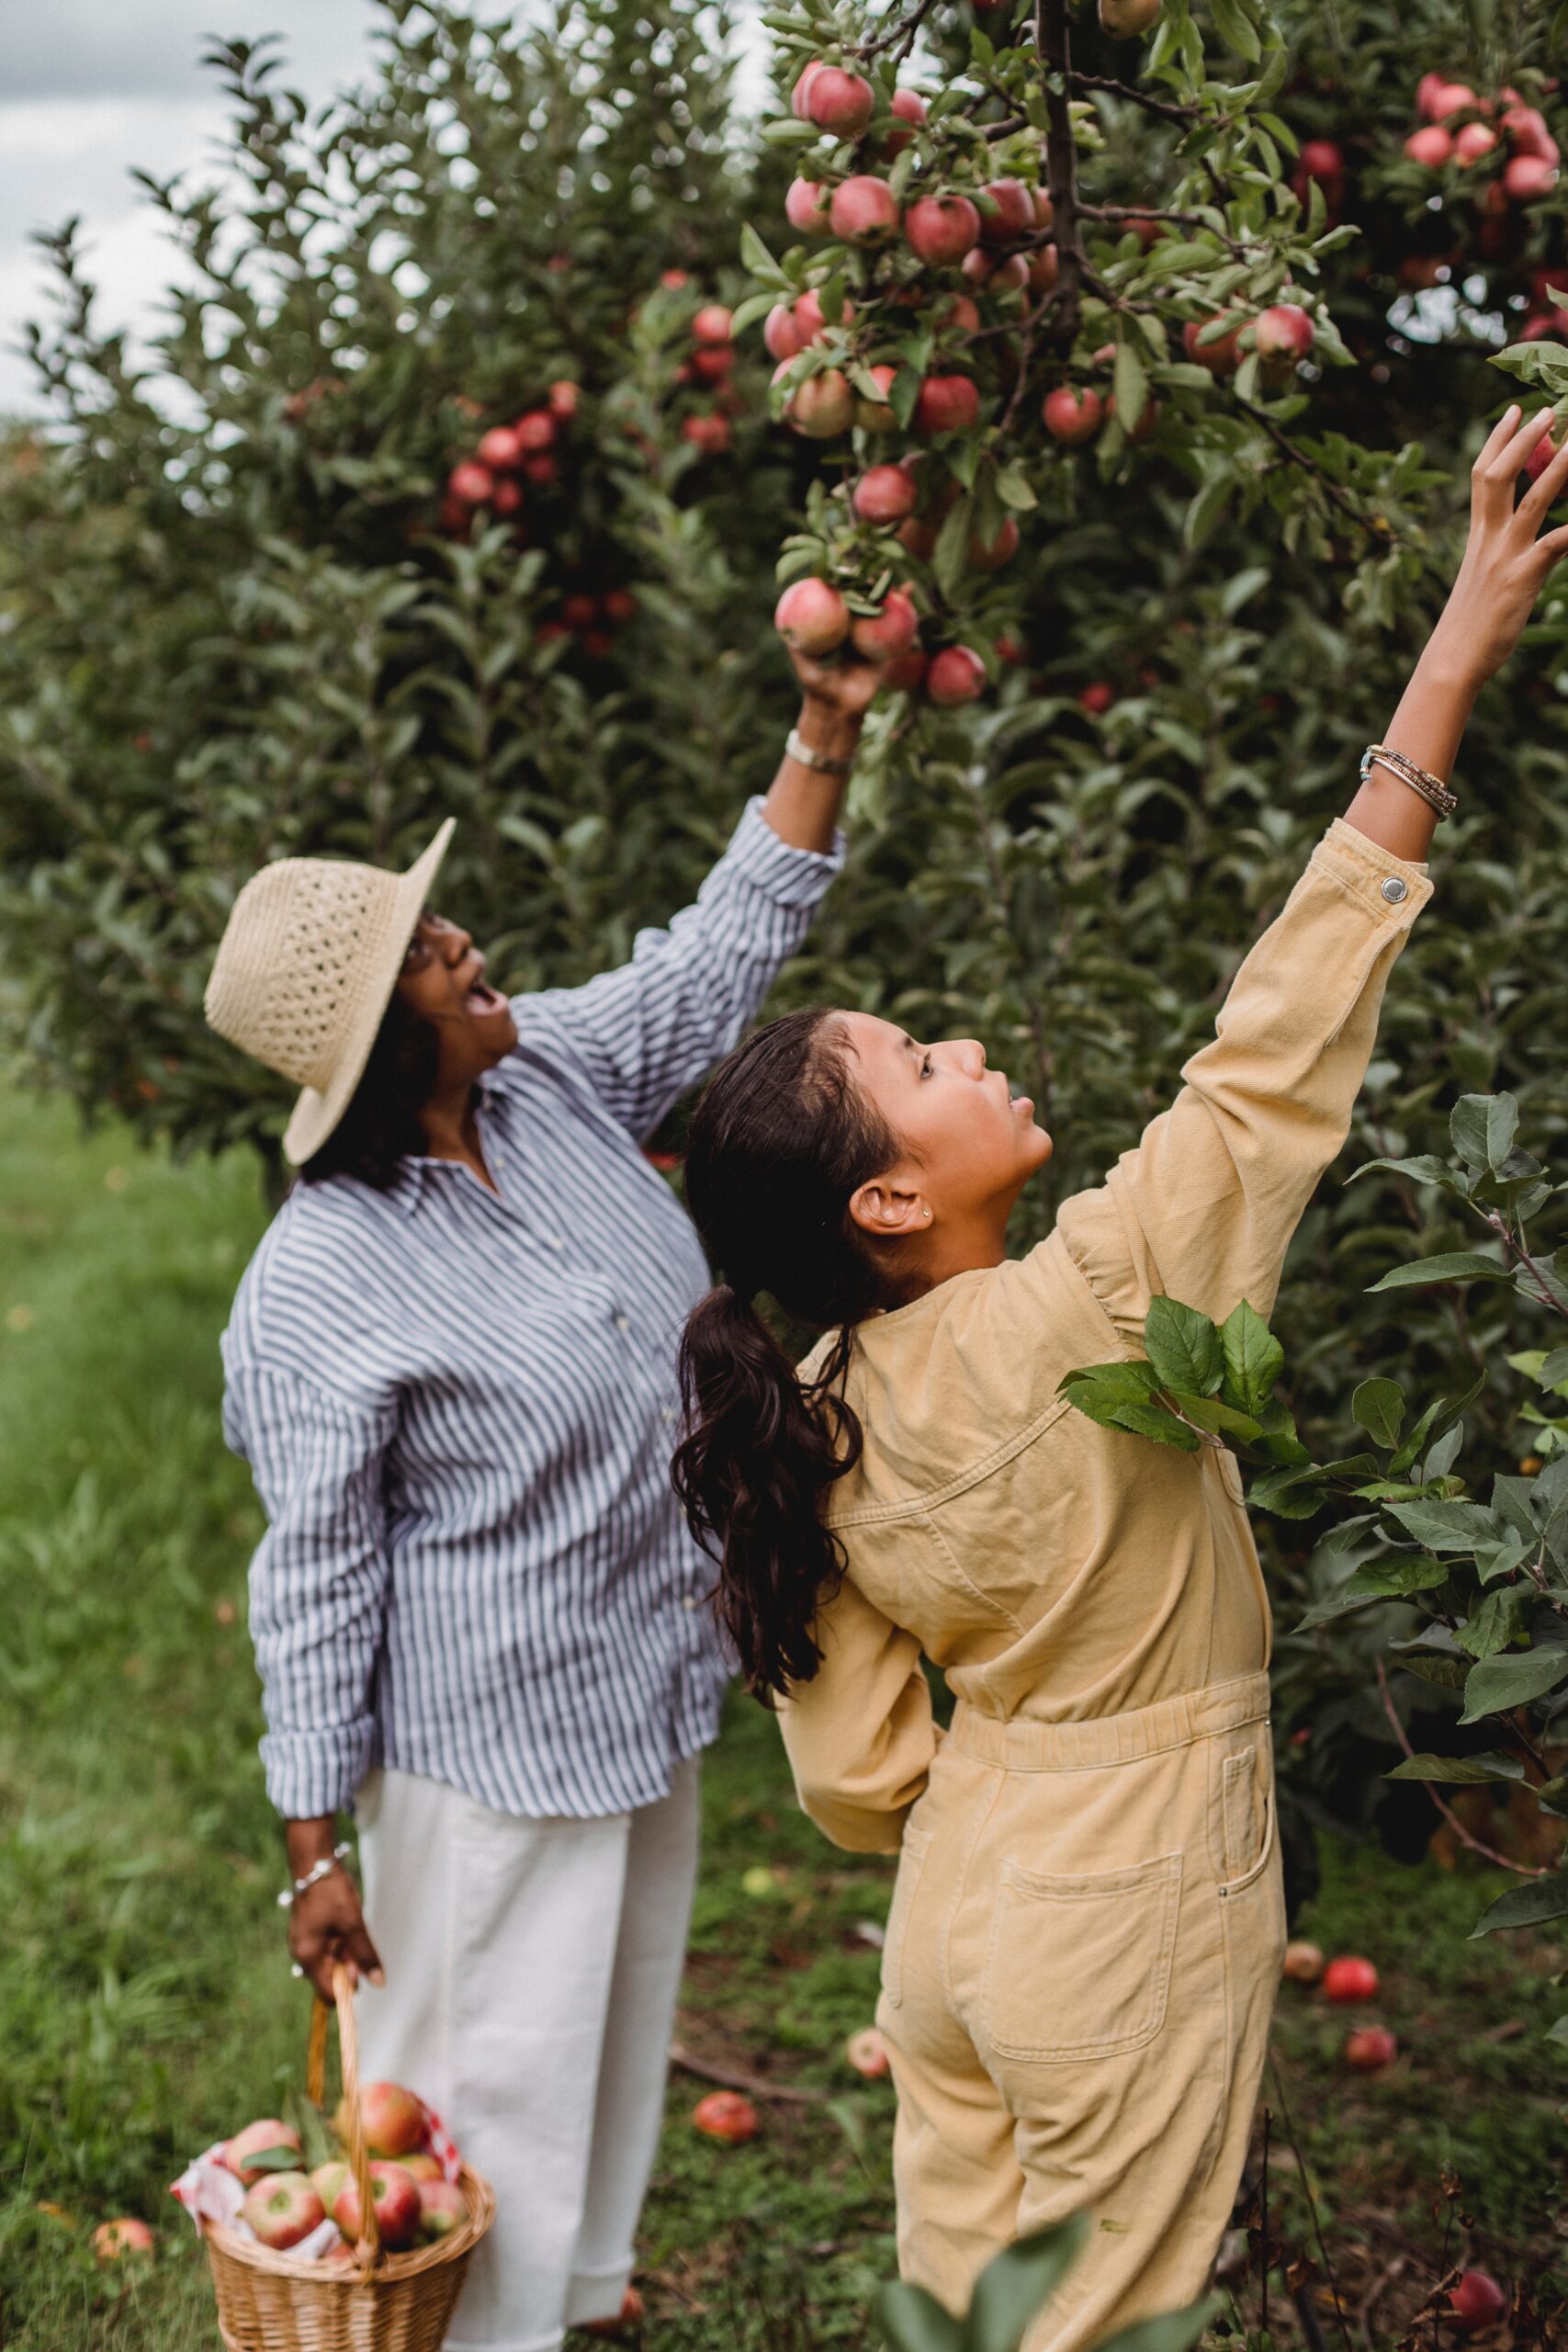 Mother and daughter picking apples.